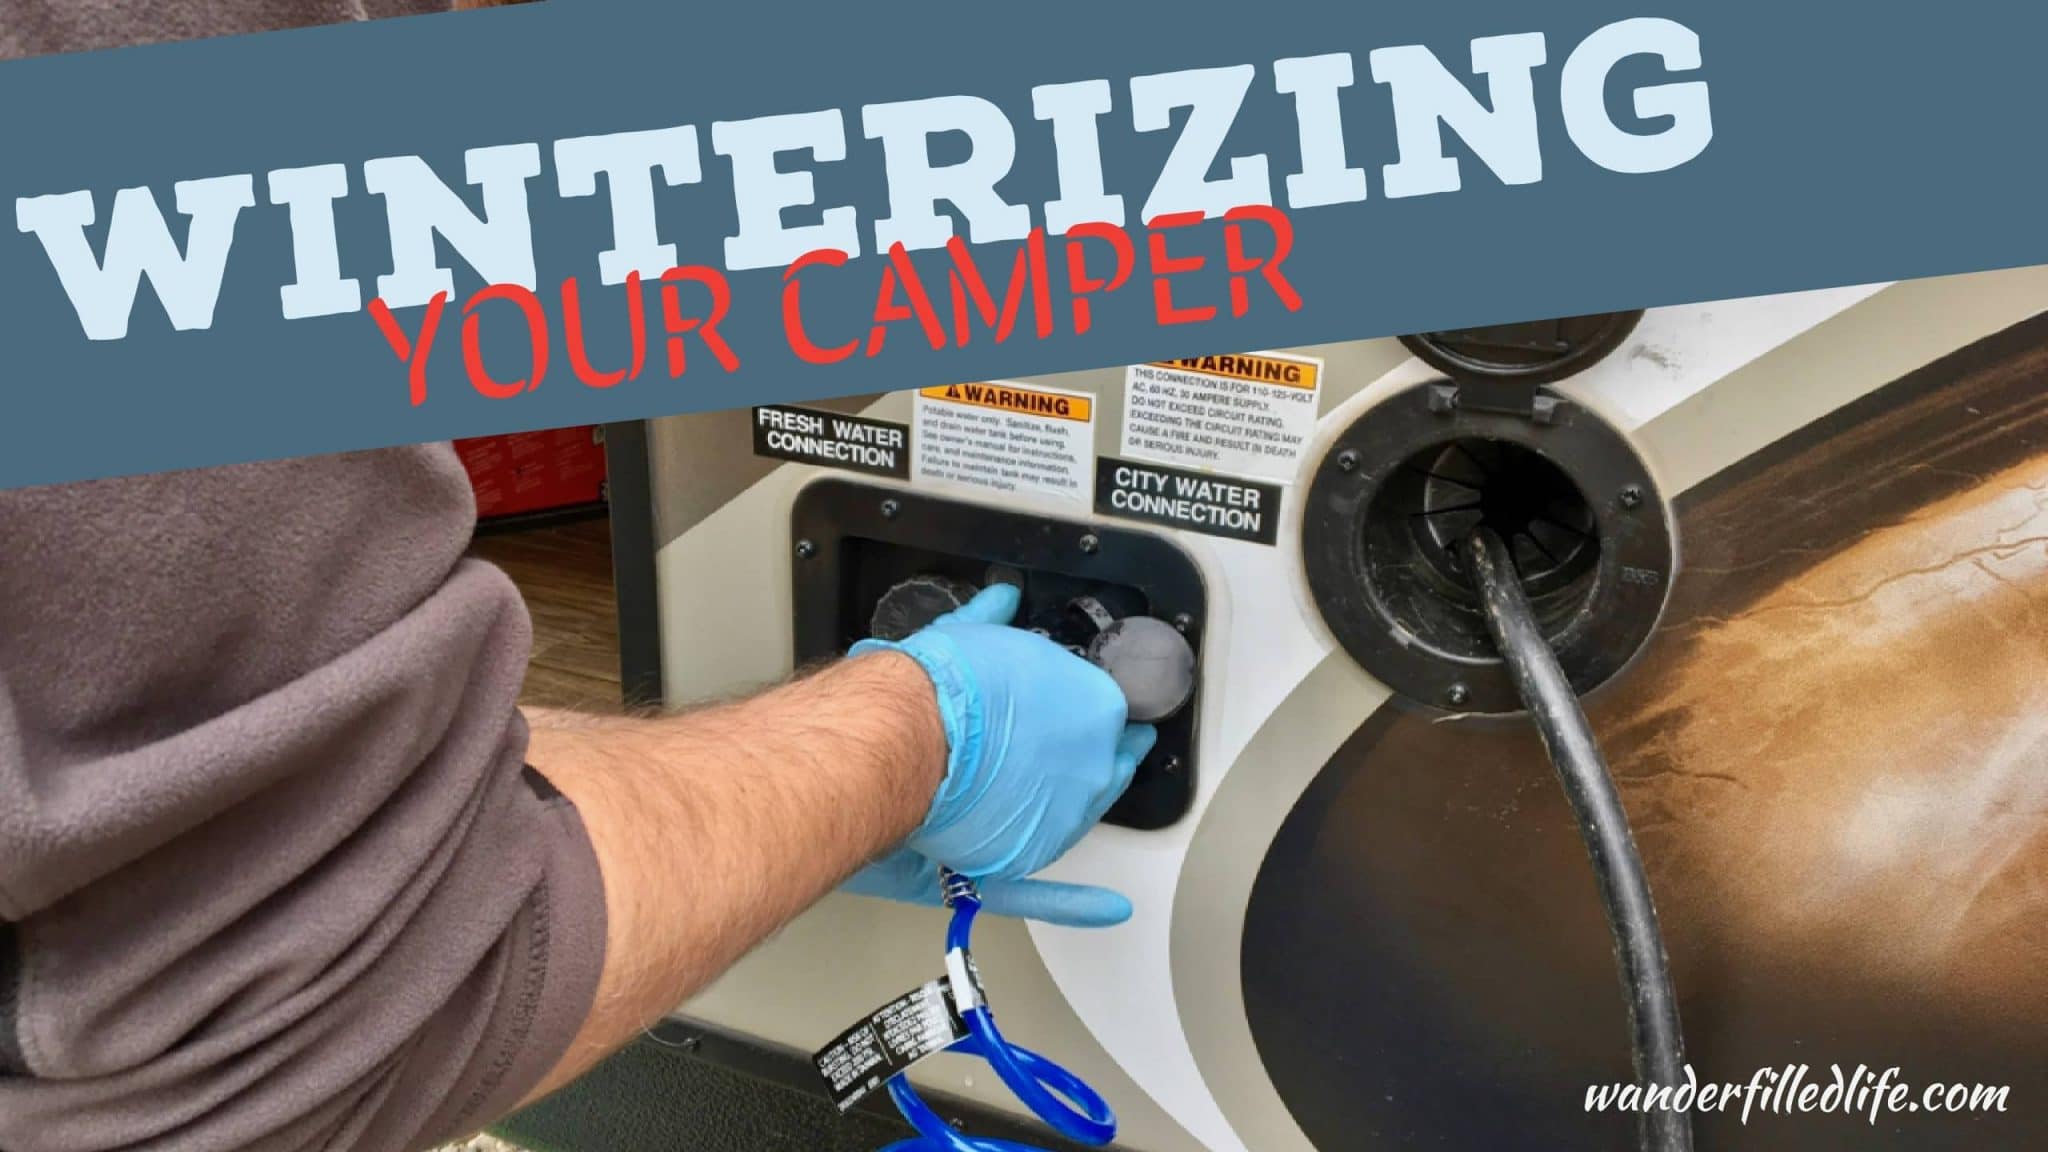 Winterizing Your Camper